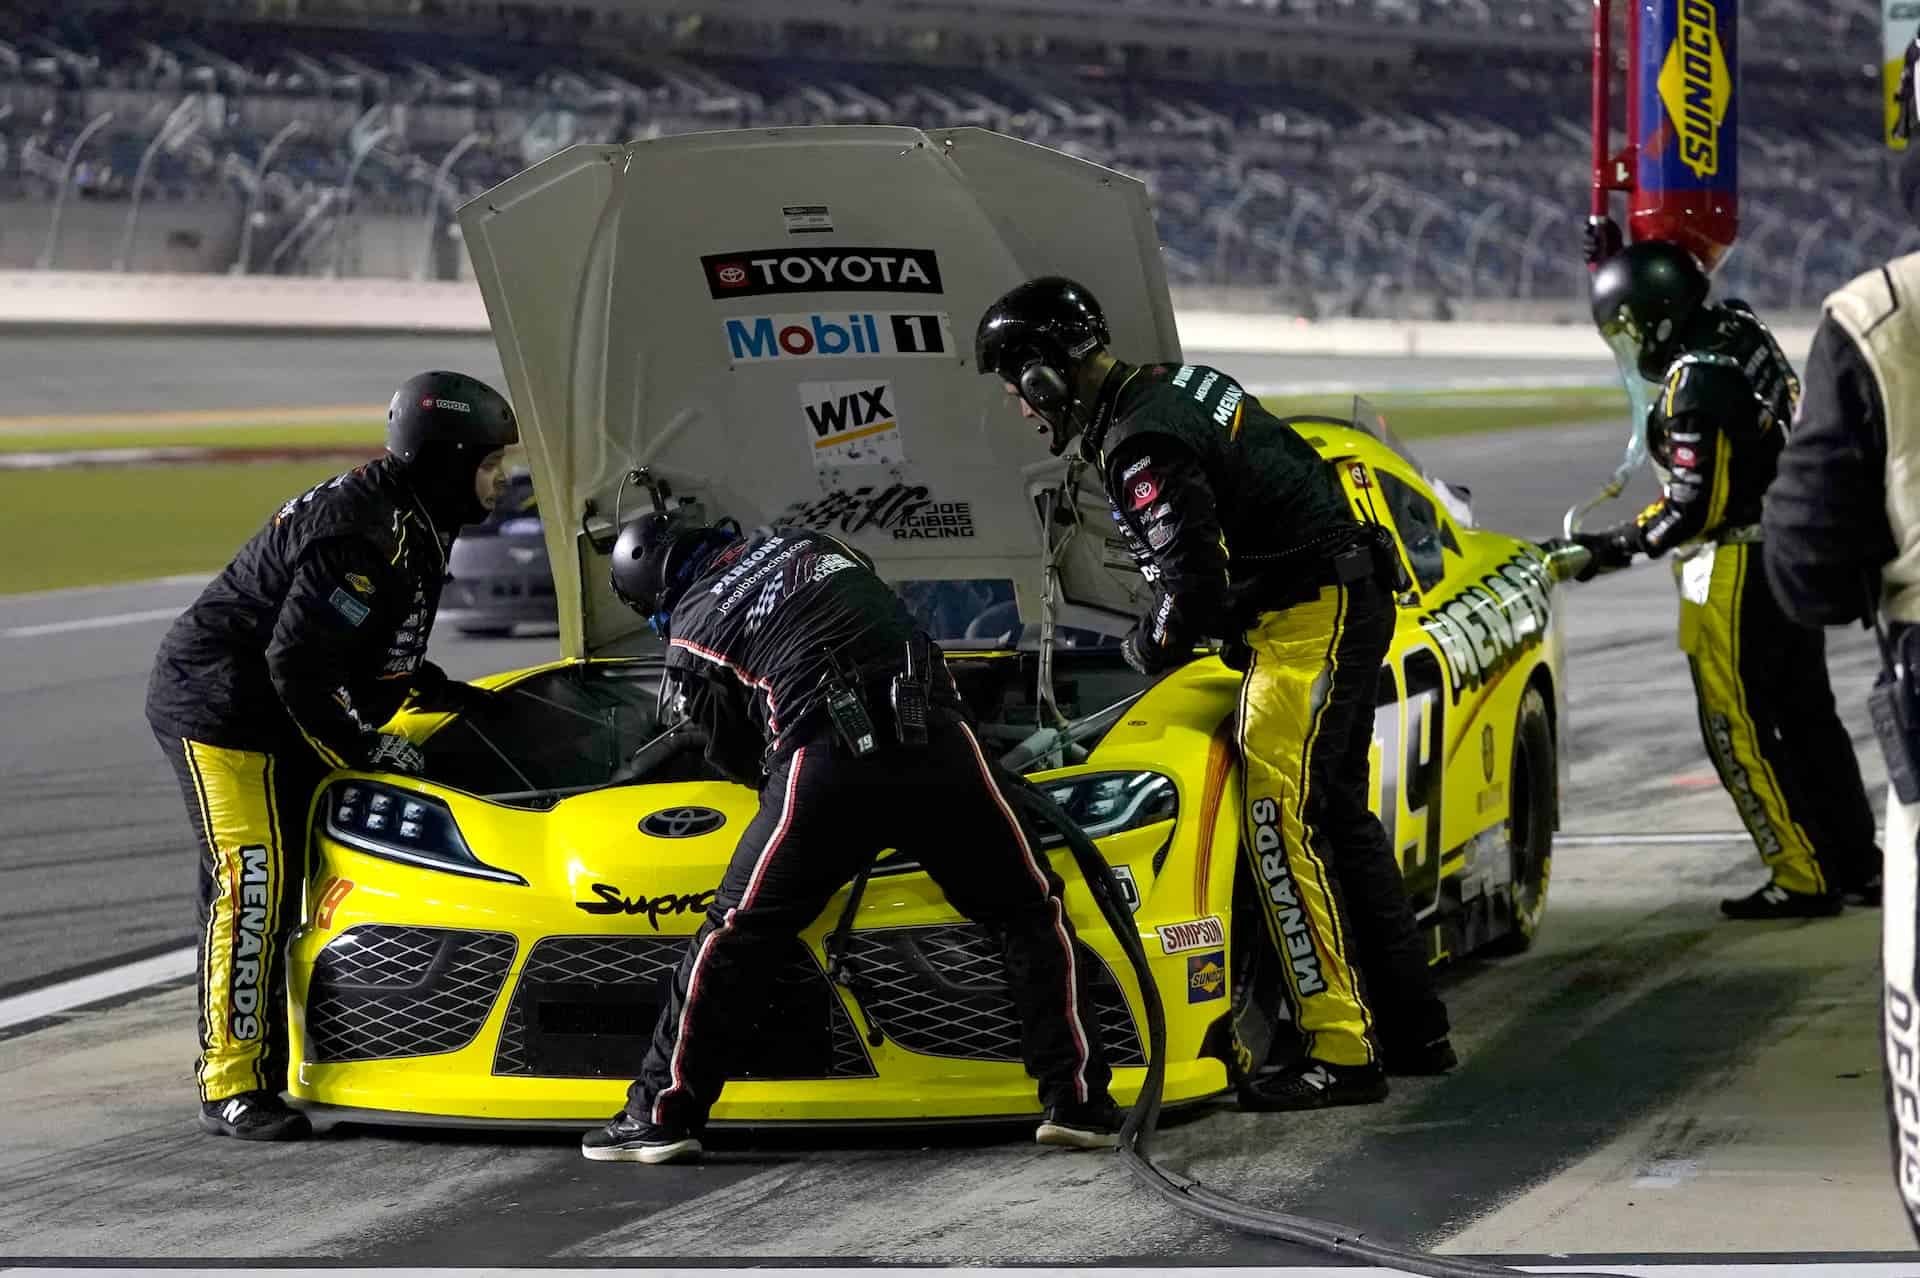 Brandon Jones sits on pit road at Daytona International Speedway. The No. 19 crew works under the hood to address an overheating issue after debris covered the front grill.